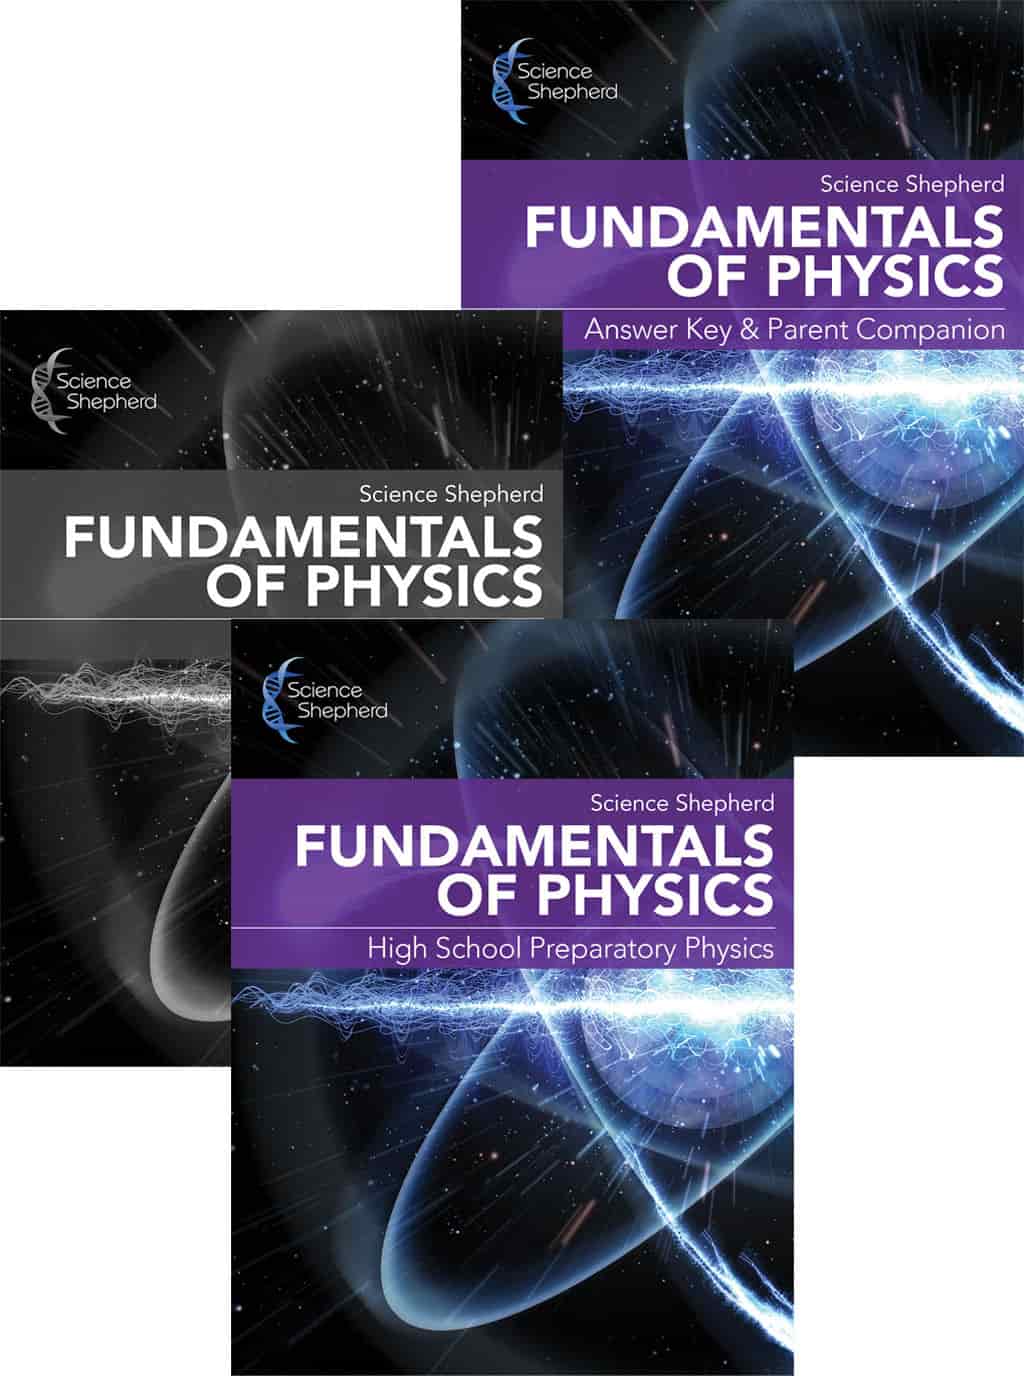 Physics curriculum homeschool 3-book set cover with textbook, test booklet, parent guide